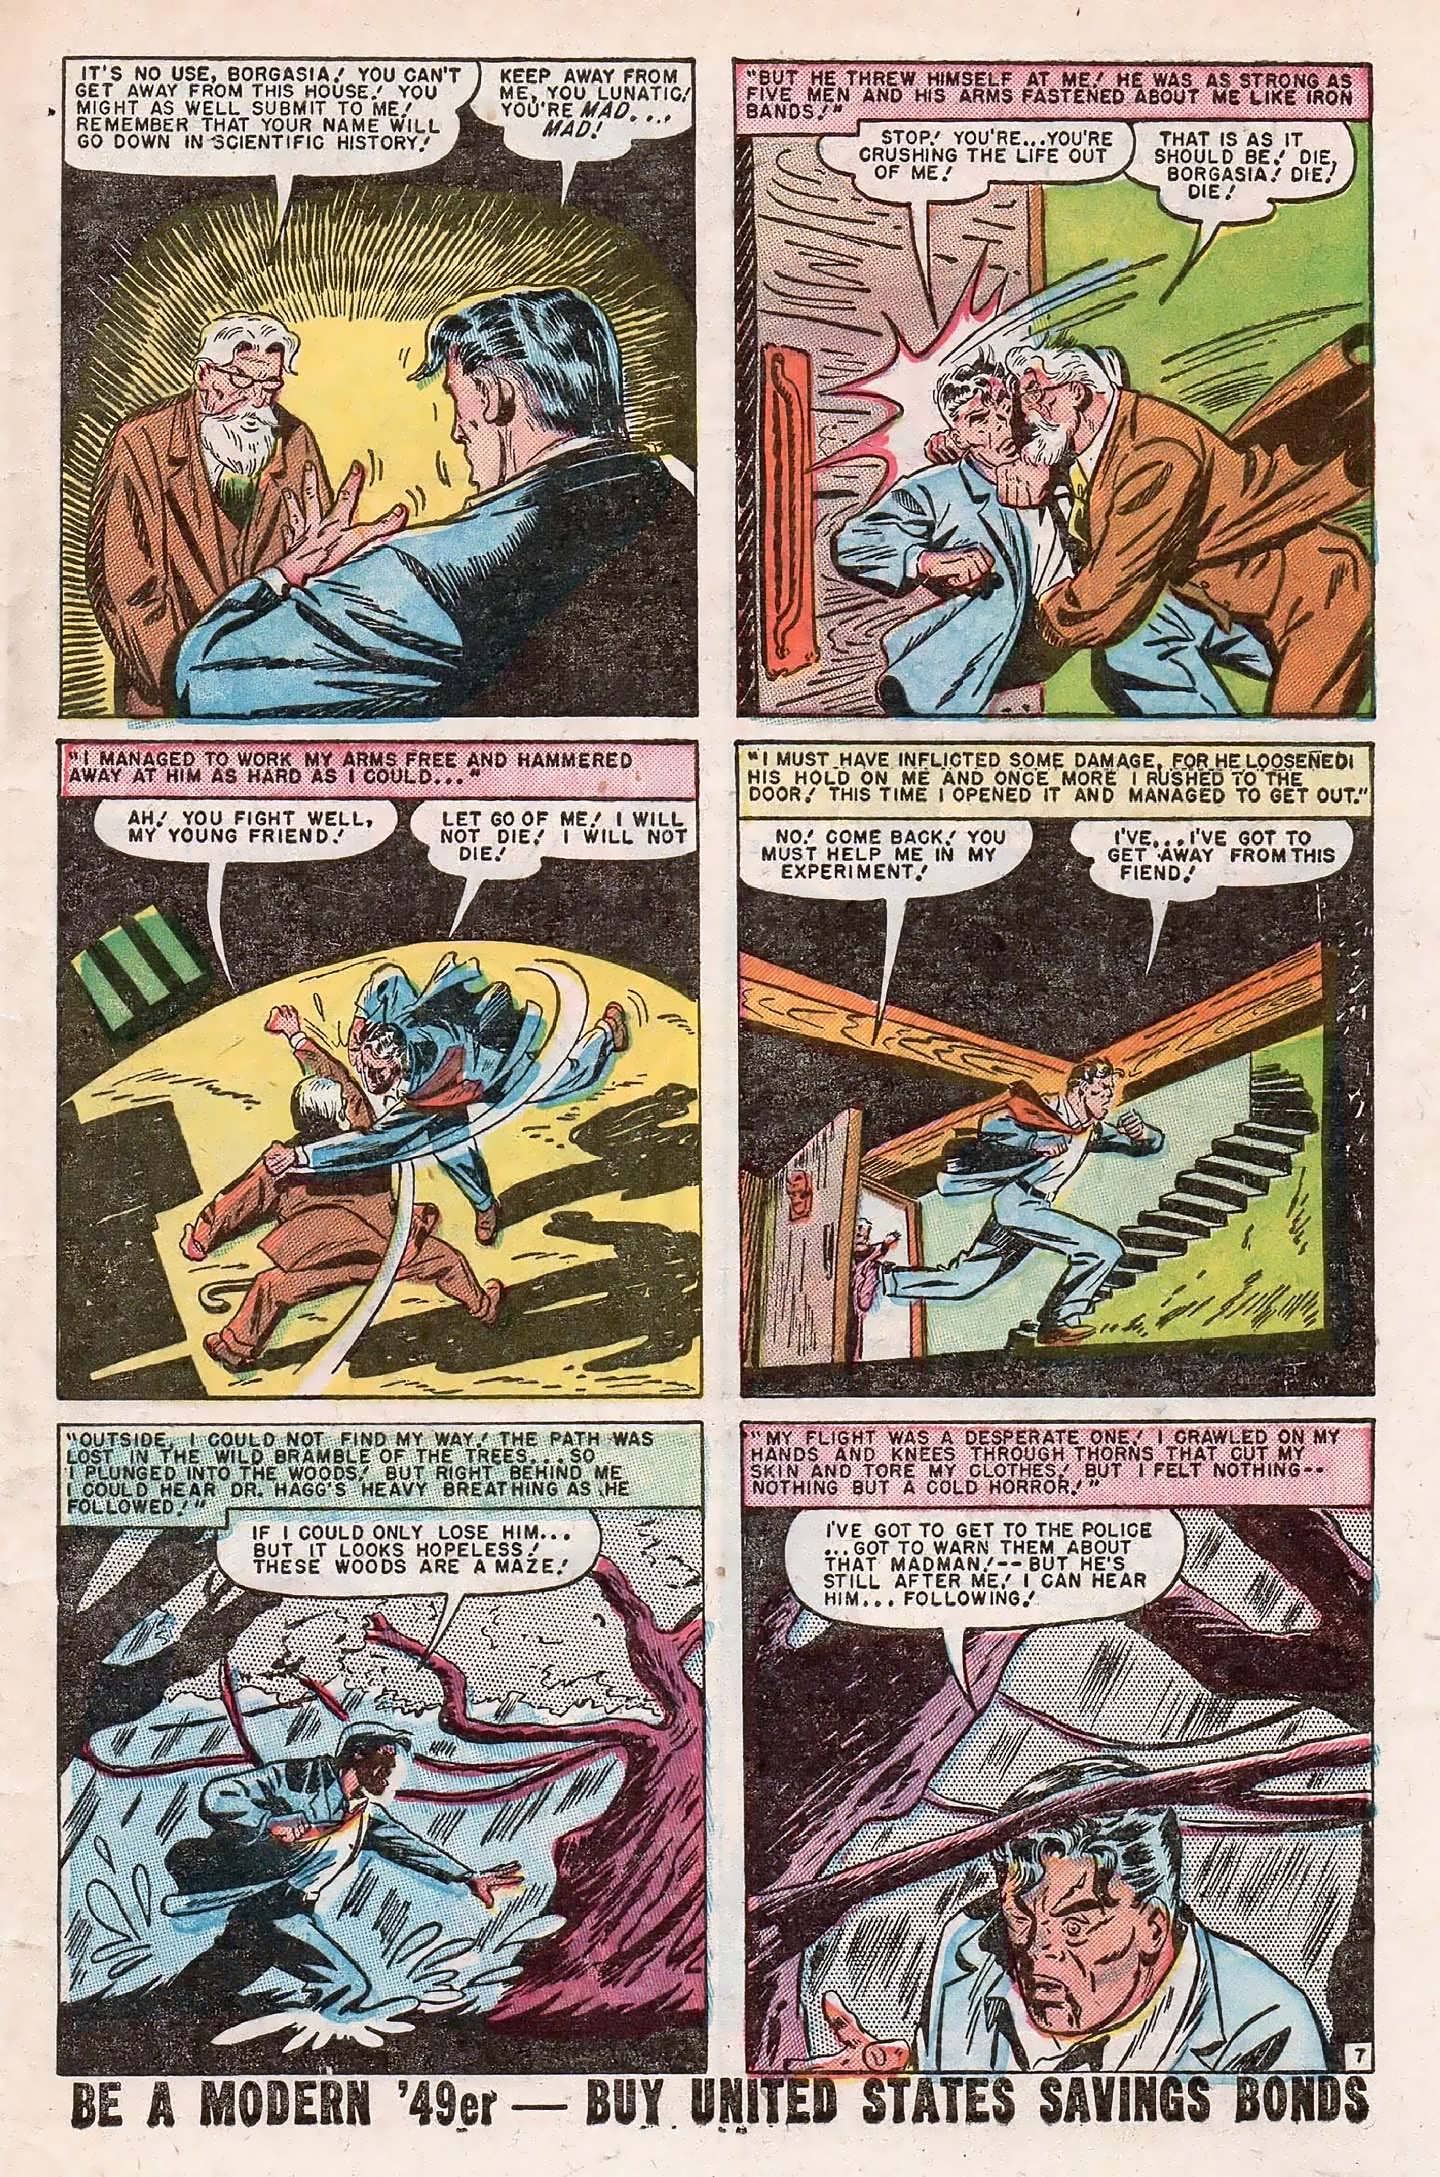 Marvel Tales (1949) 93 Page 46